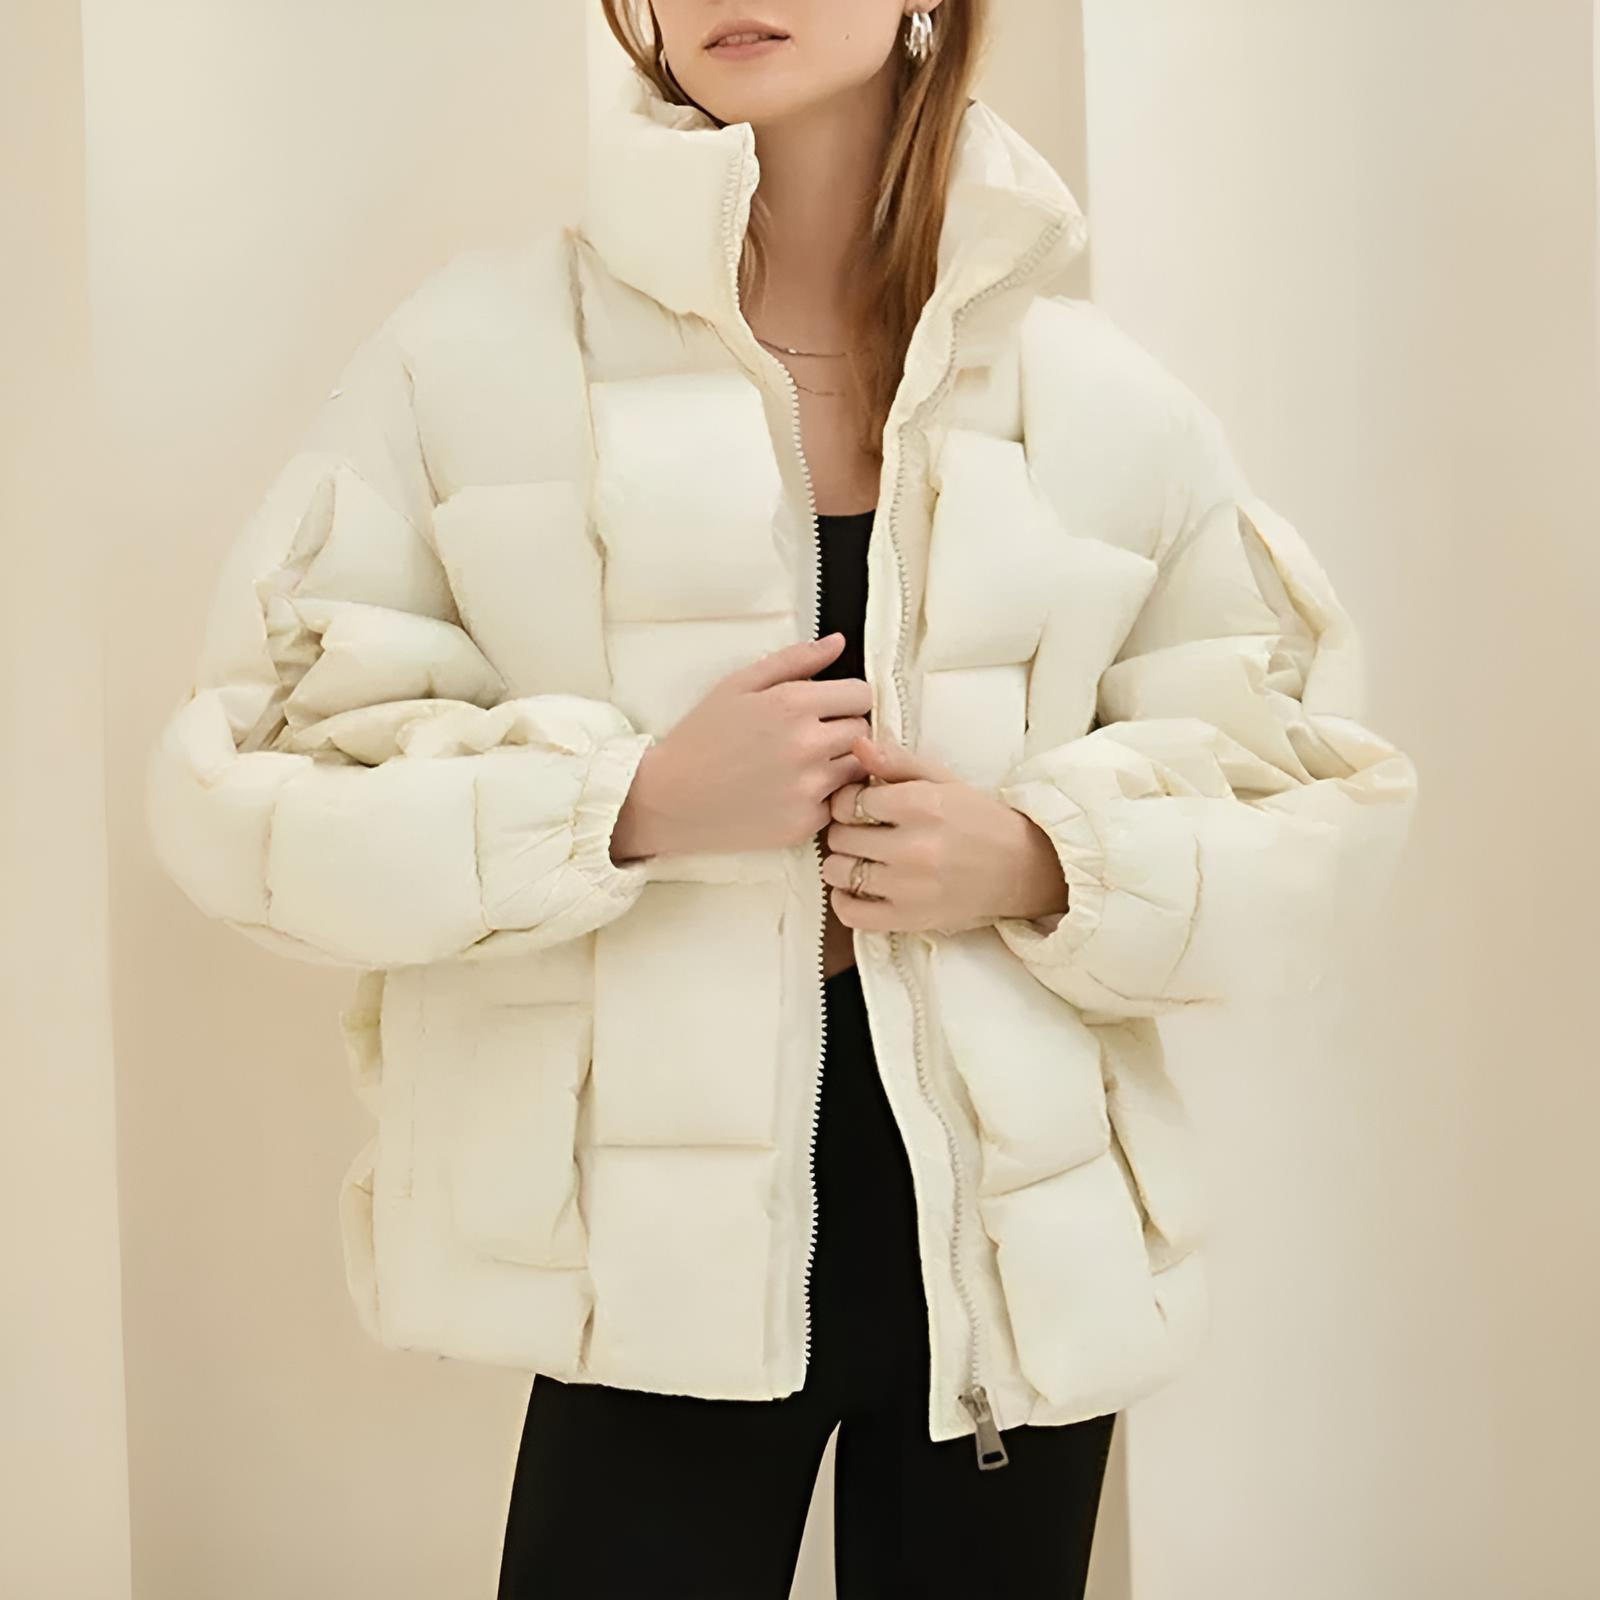 L'ATERIBÉLLE EDGY QUILTED PUFFER BY LILIAN-THOURAM™